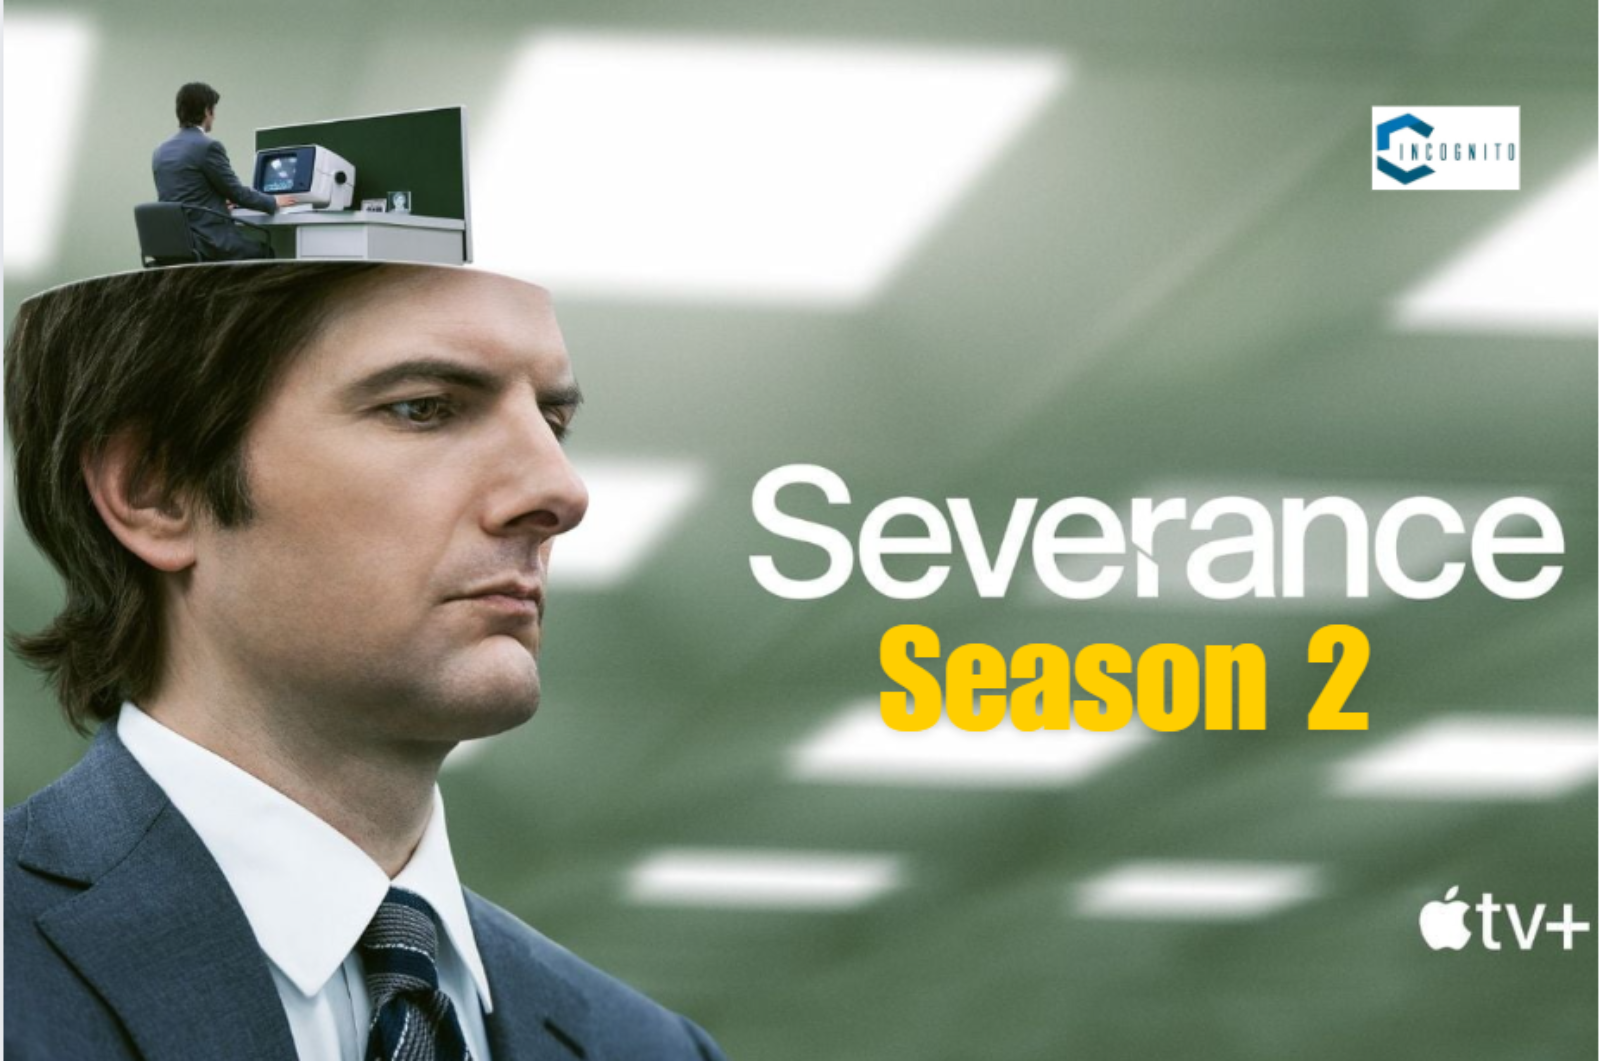 Severance Season 2: Release Date, Fan Theories, Budget, And All You Need To Know